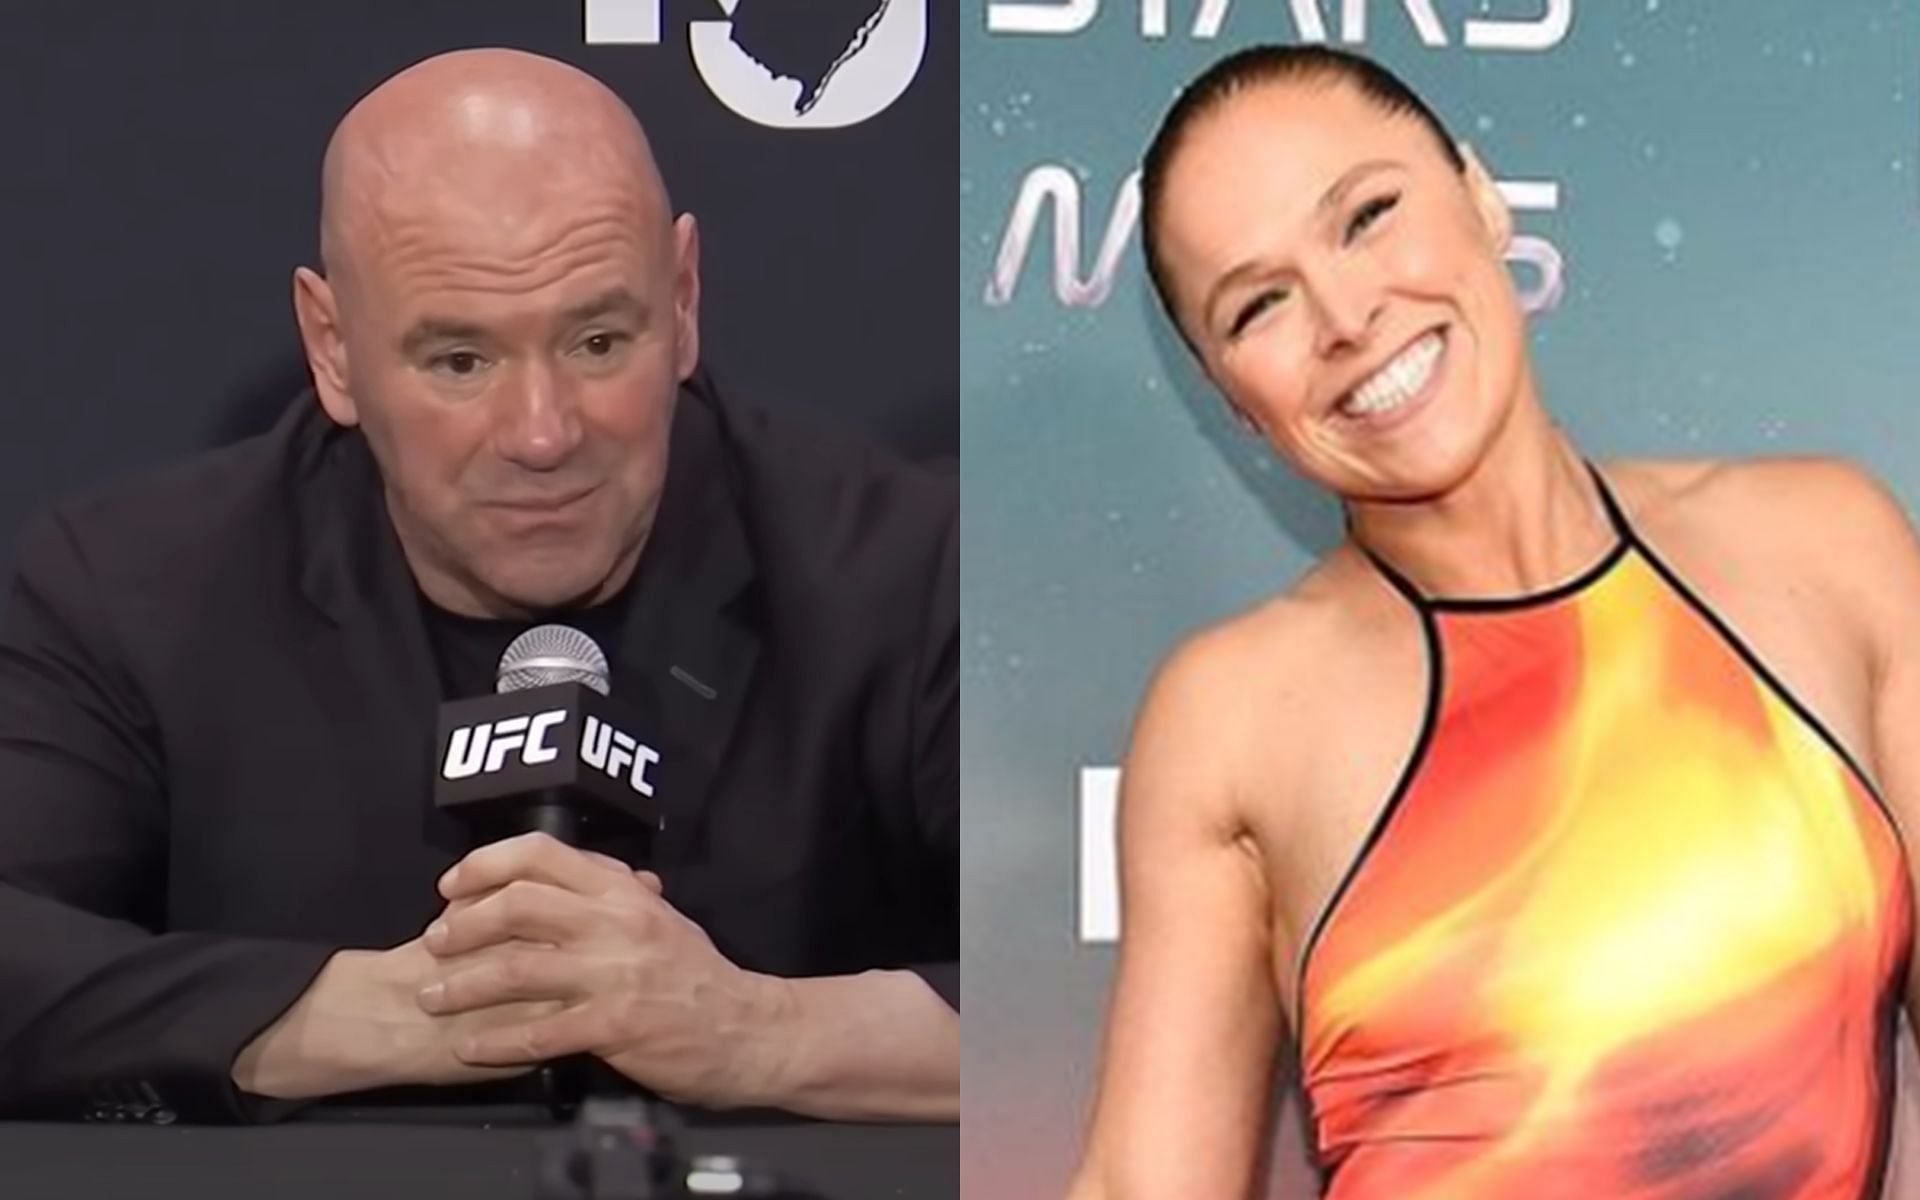 Dana White (left) has been one of the biggest supporters Ronda Rousey (right) . [Images courtesy: UFC on YouTube and @rondarousey on Instagram]